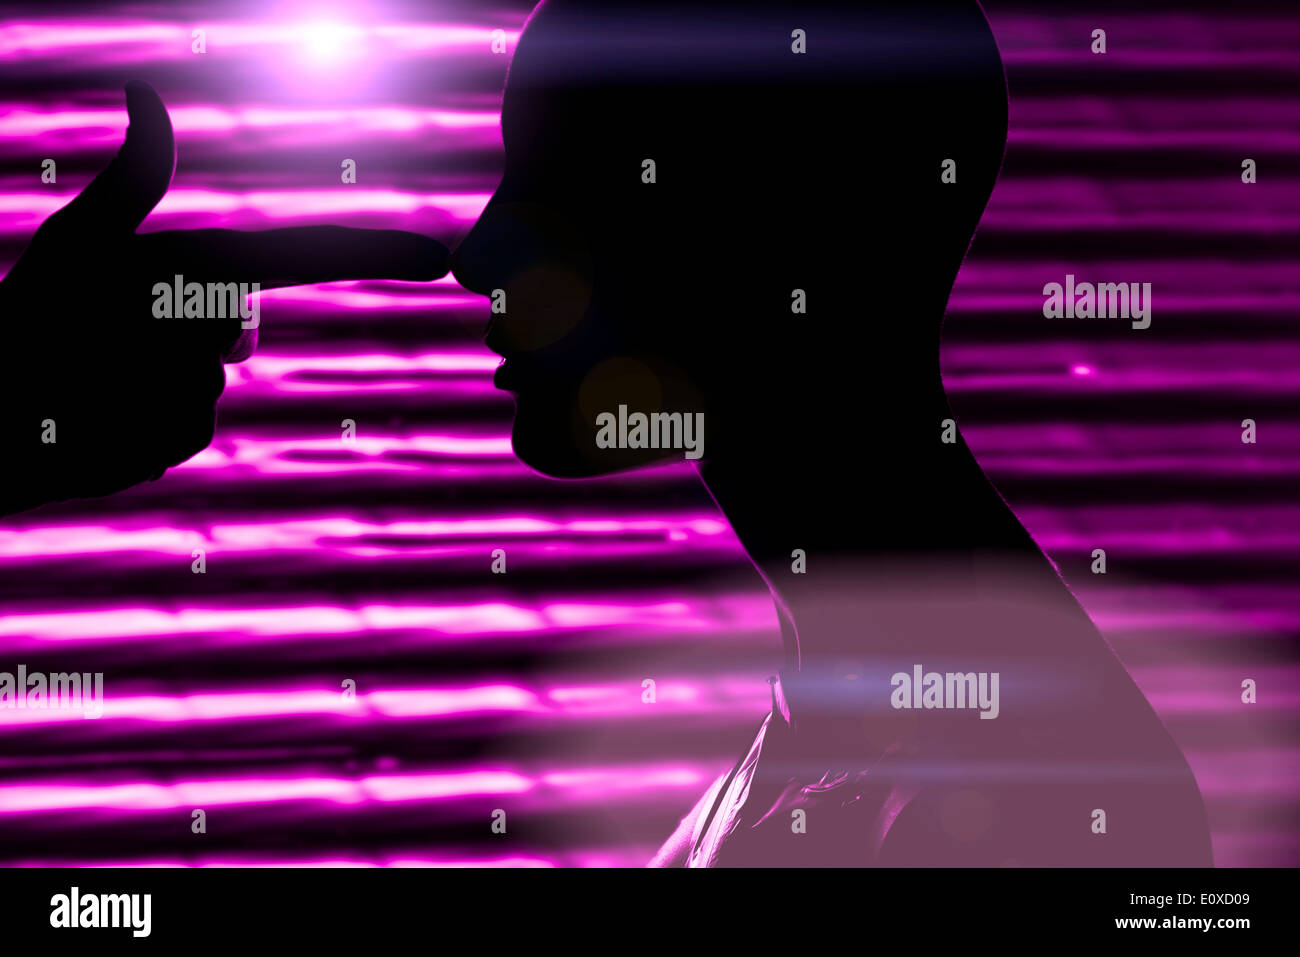 Silhouette of head of mannequin and hand of a man making a threatening gesture imitating a gun pointed at the female dummys head. Night club setting with purple light. Stock Photo